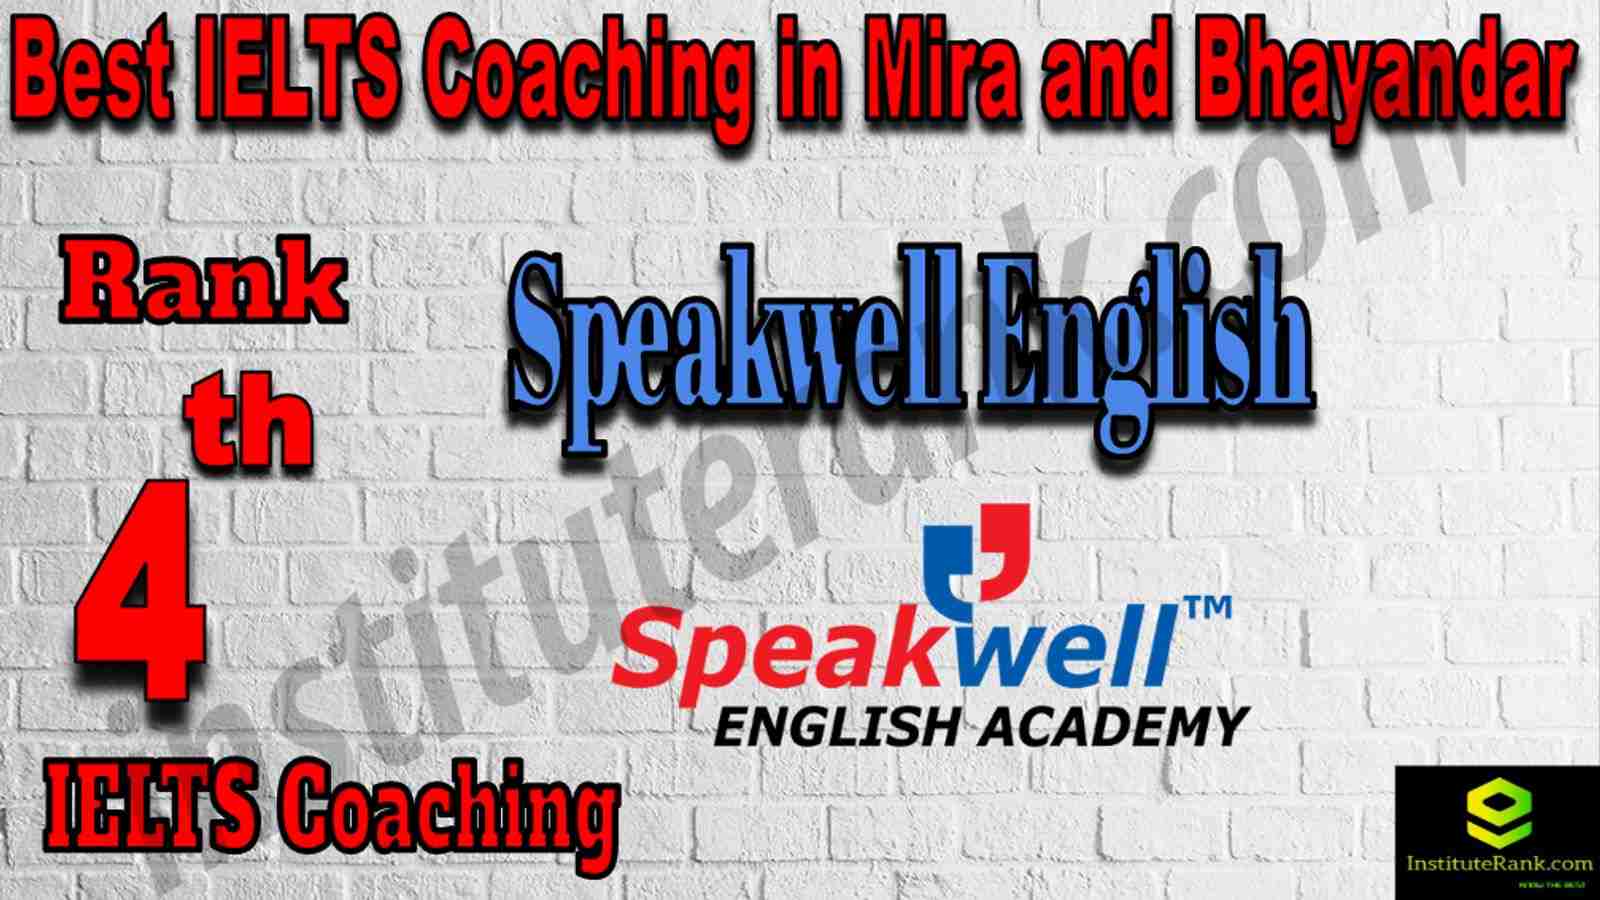 4th Best IELTS Coaching in Mira and Bhayandar